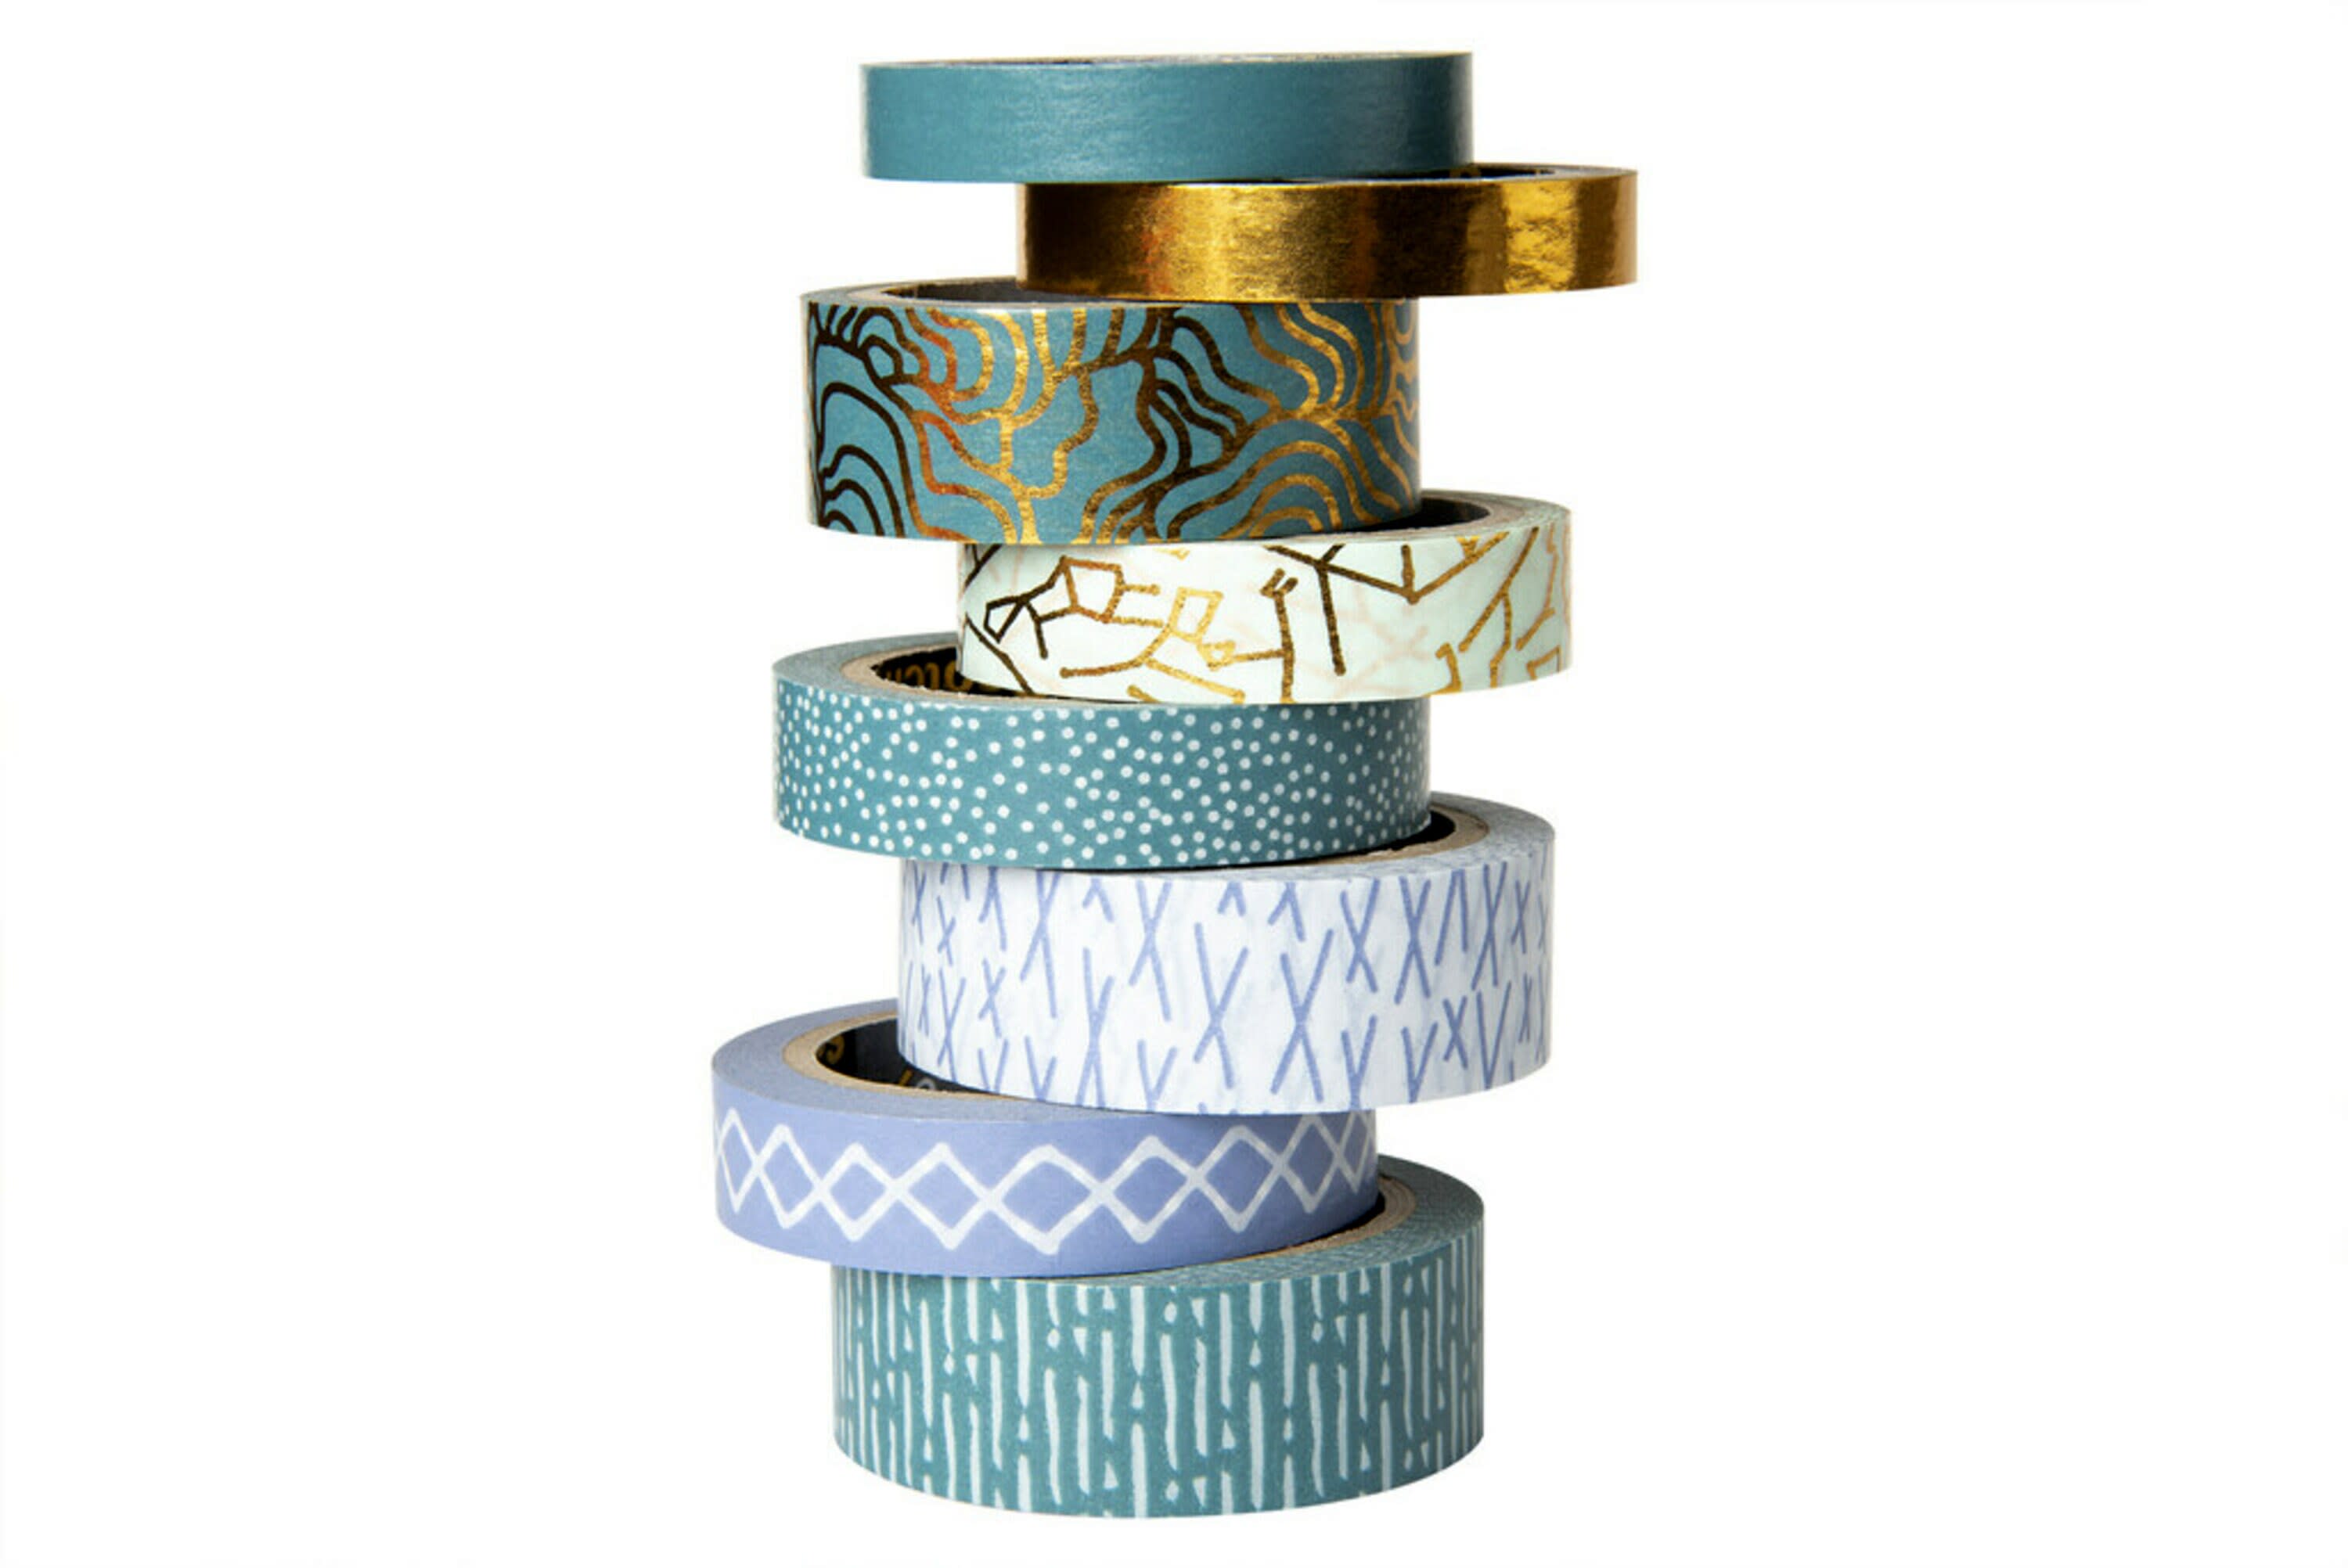 Scotch Expressions Washi Tape, Multicolors, Rolls/Pack